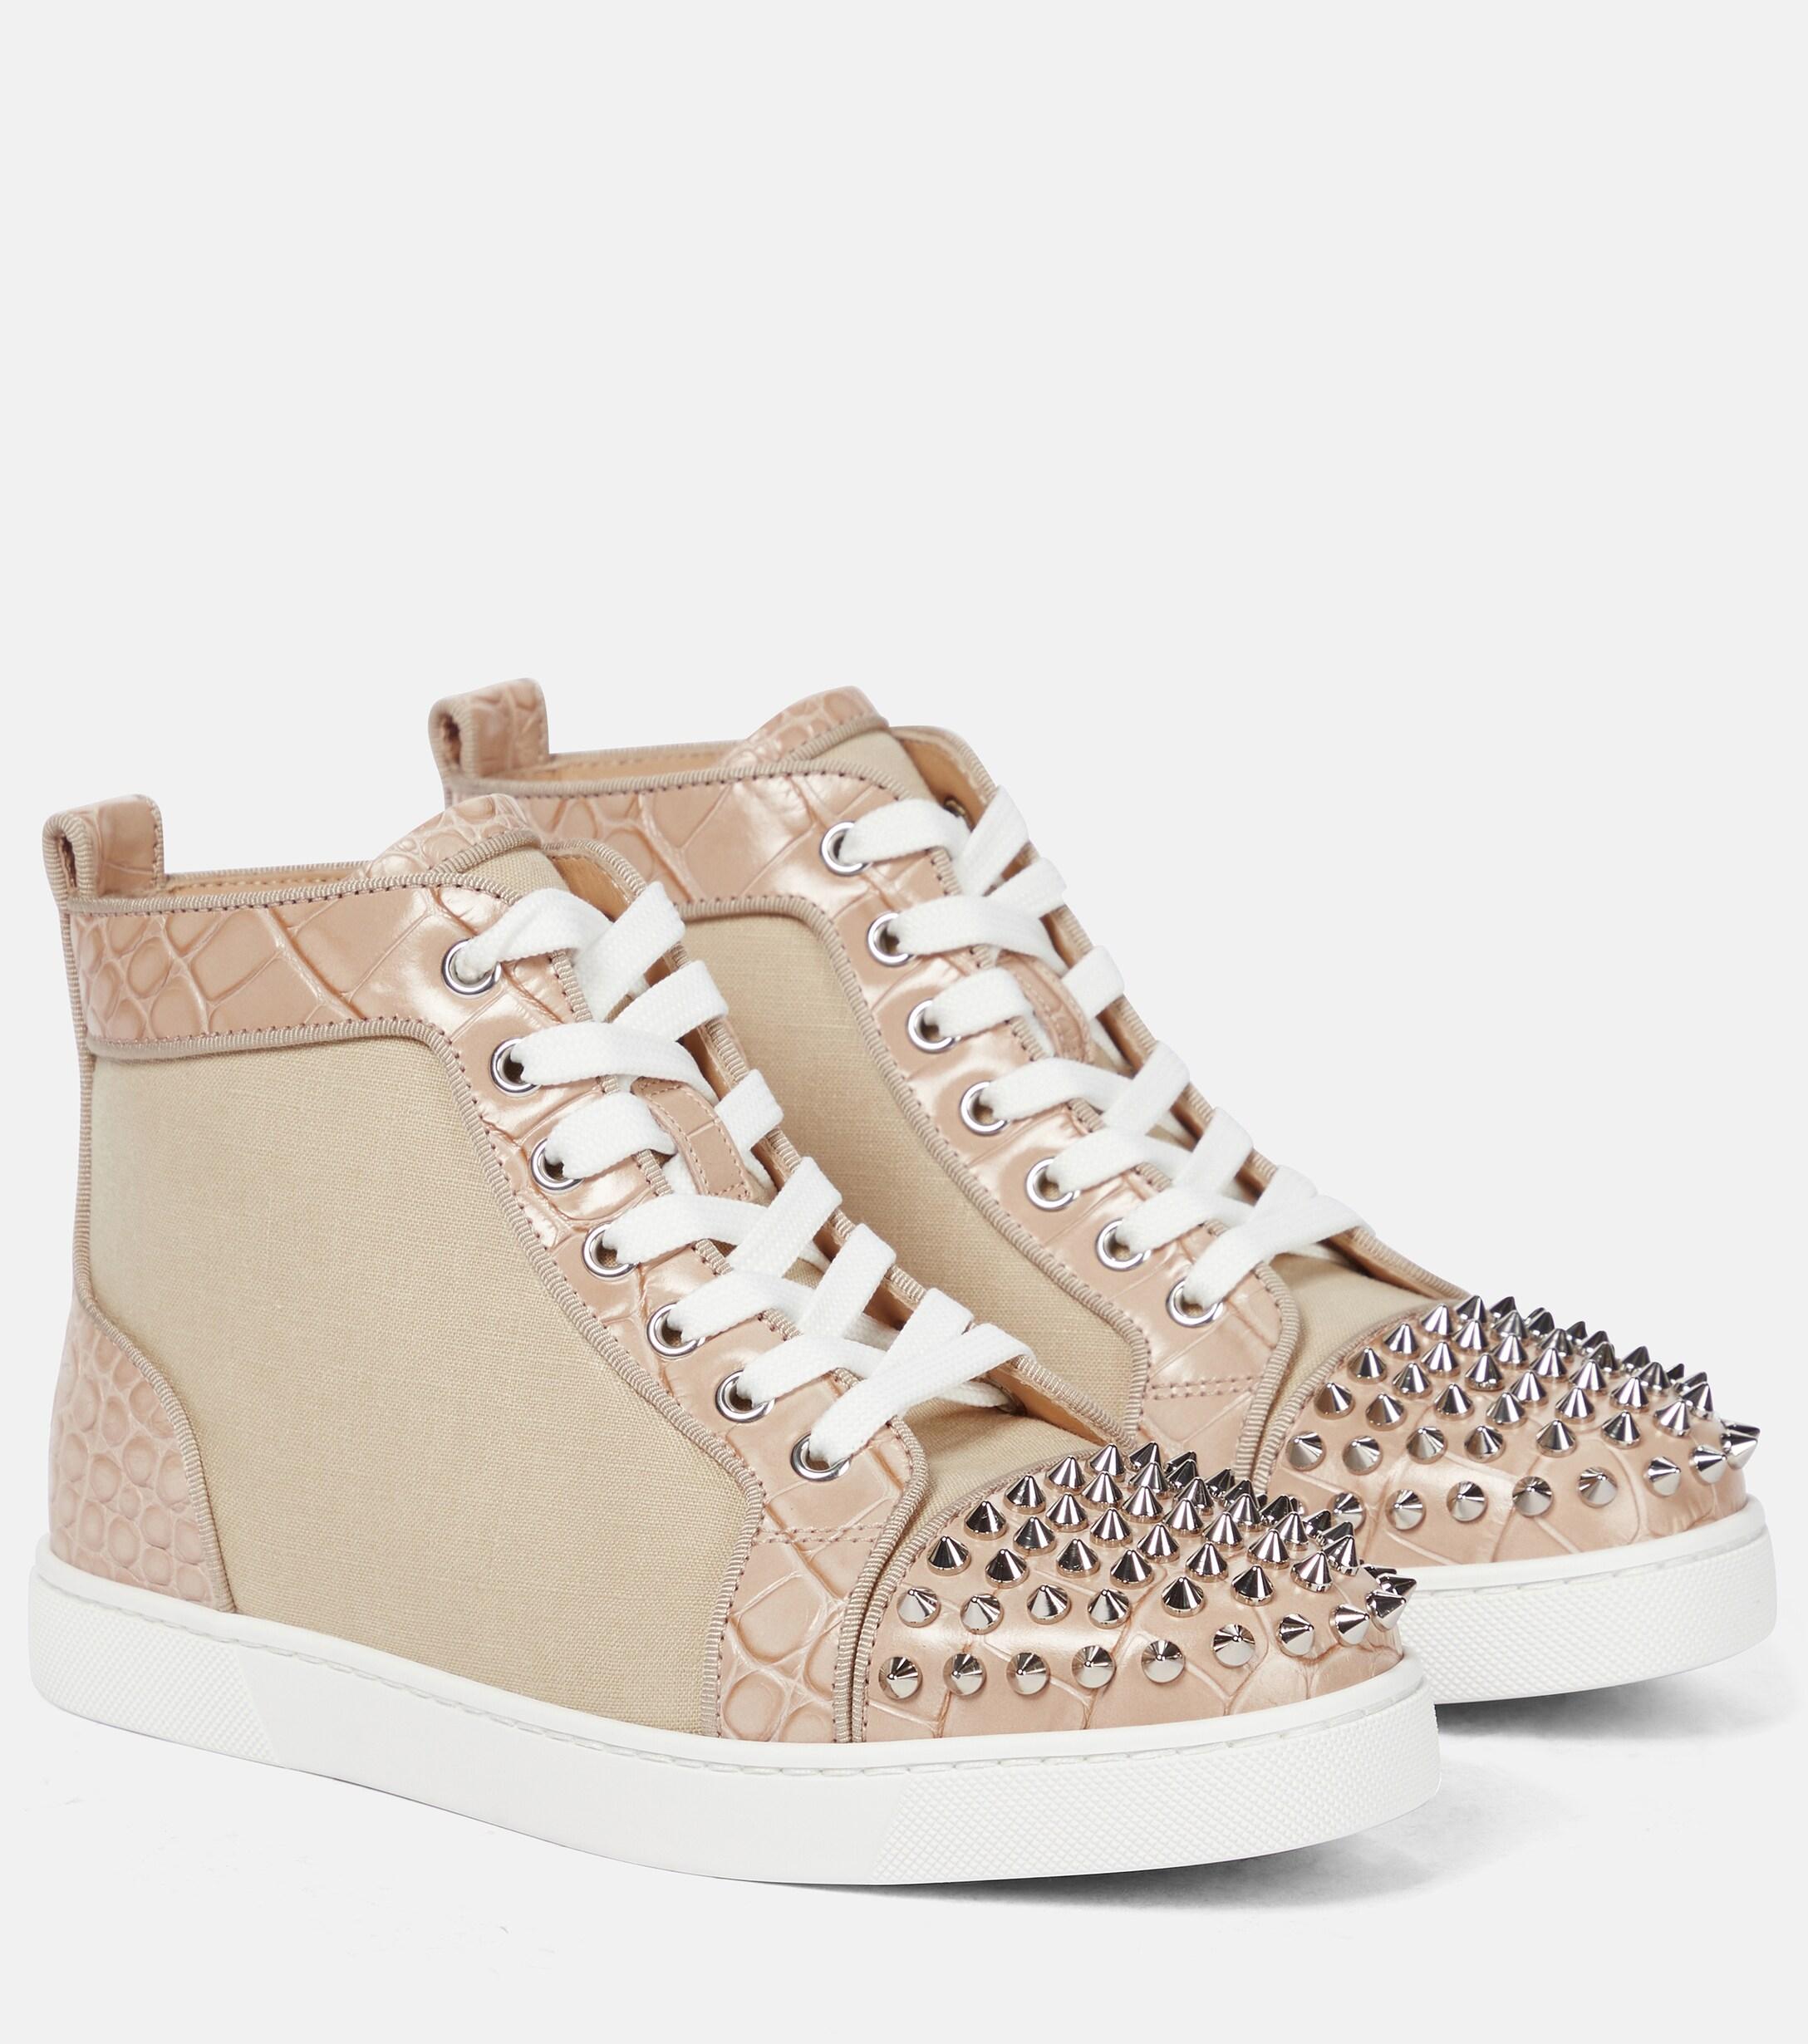 Christian Louboutin Lou Spikes Canvas Sneakers in Natural | Lyst UK